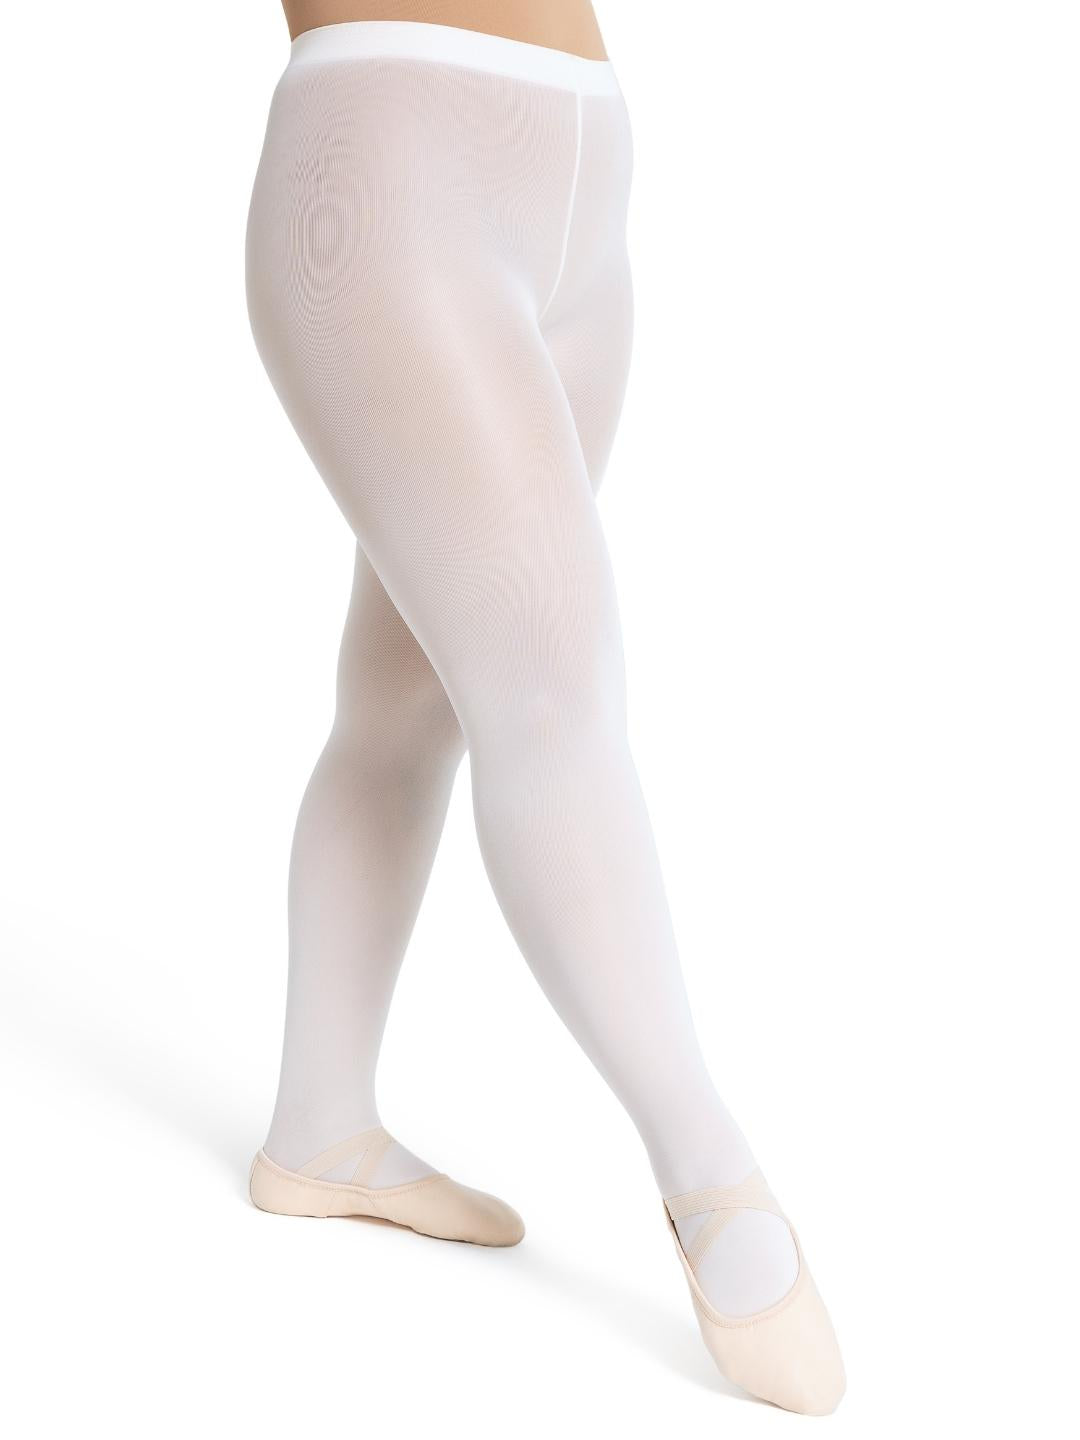 Ballet Tights Footless, Black, Ultra strong & soft